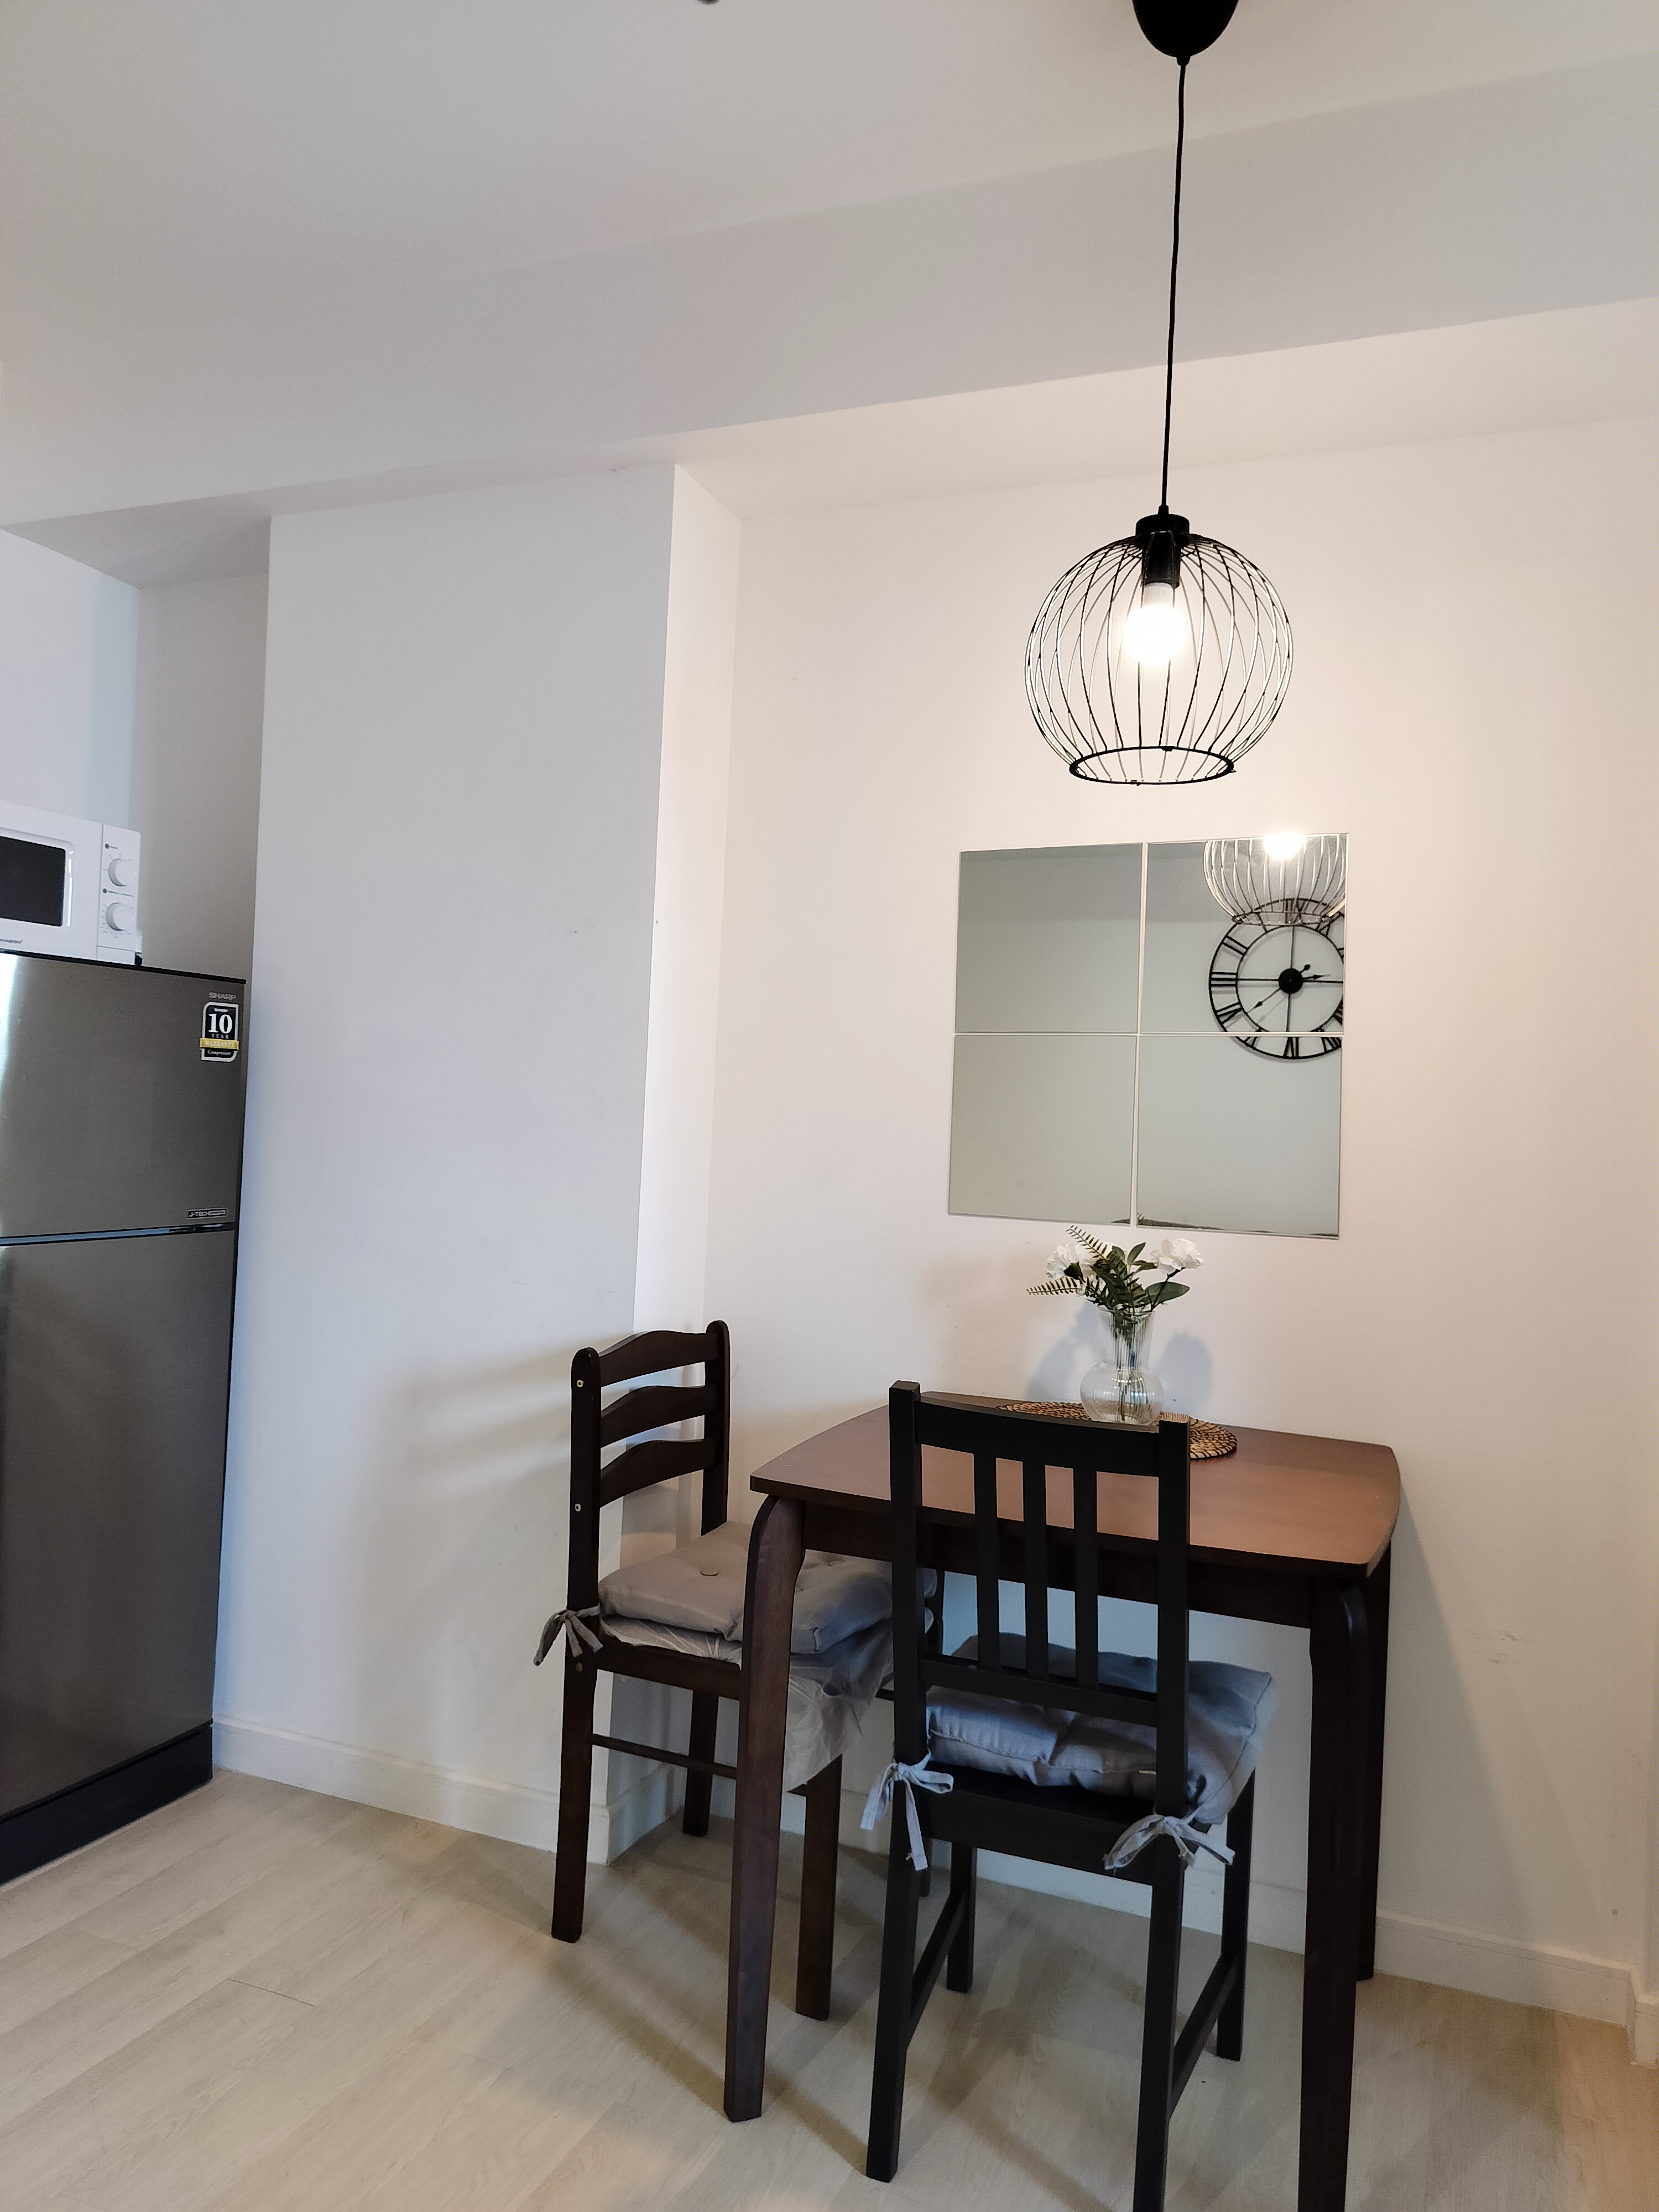 1 BEDROOM UNIT FOR SALE IN AZURE RESIDENCES, PARANAQUE CITY